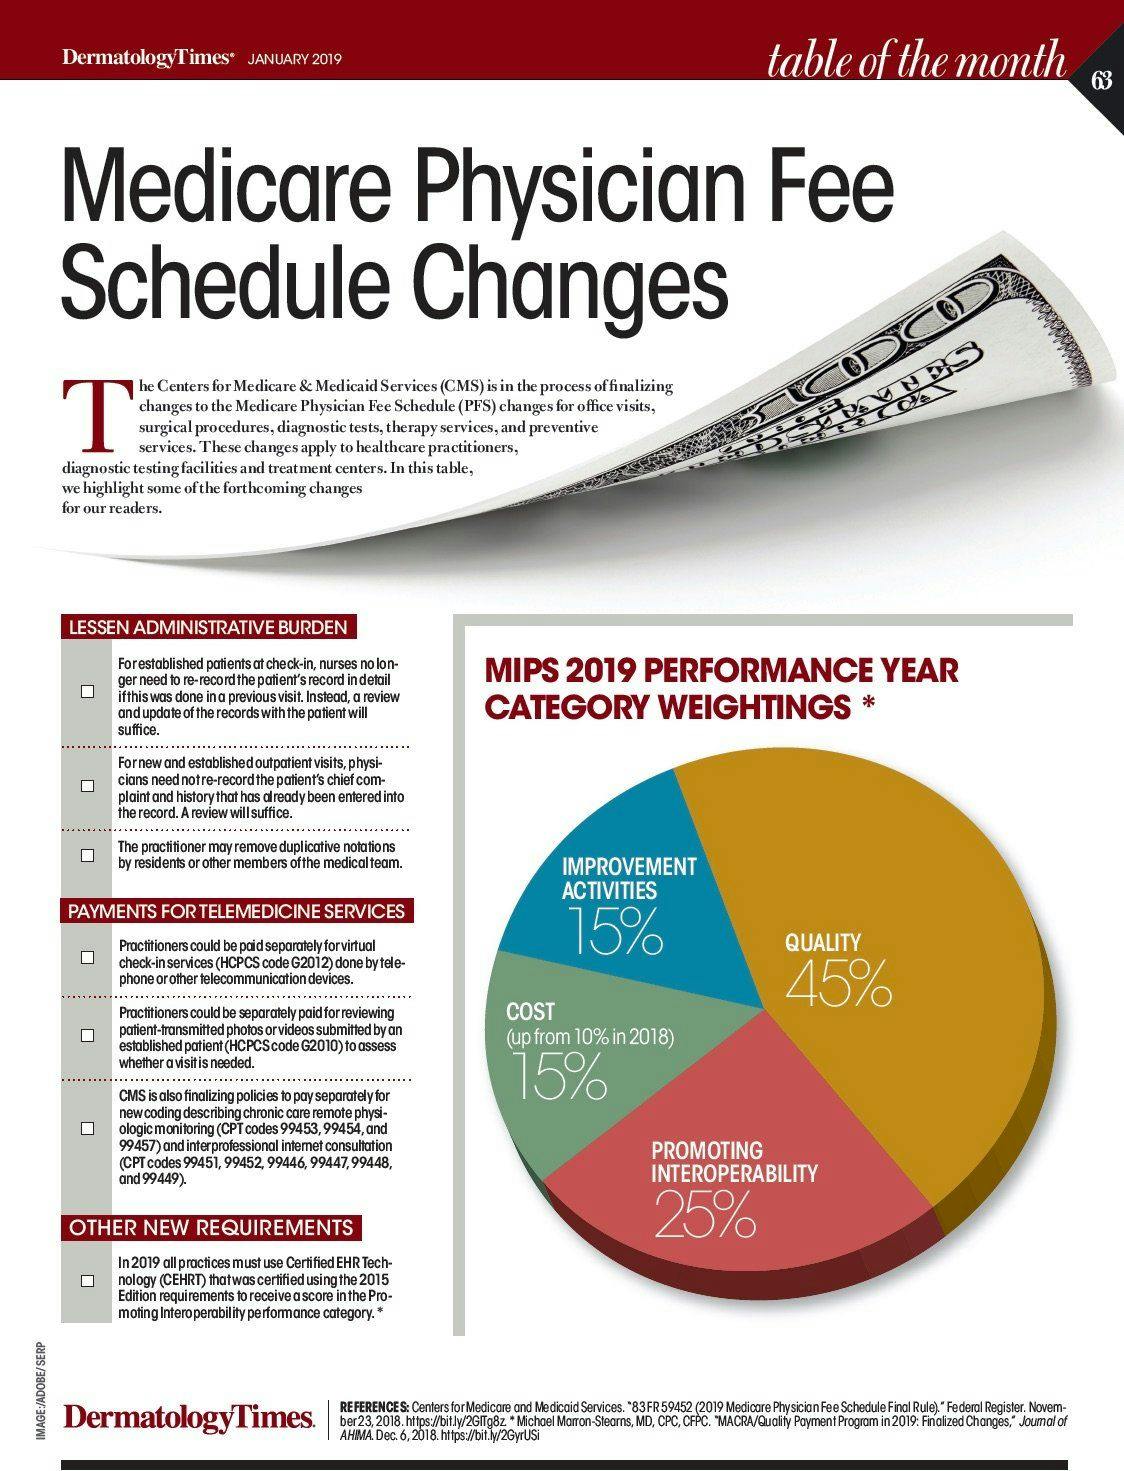 Medicare Physician Fee Schedule Changes